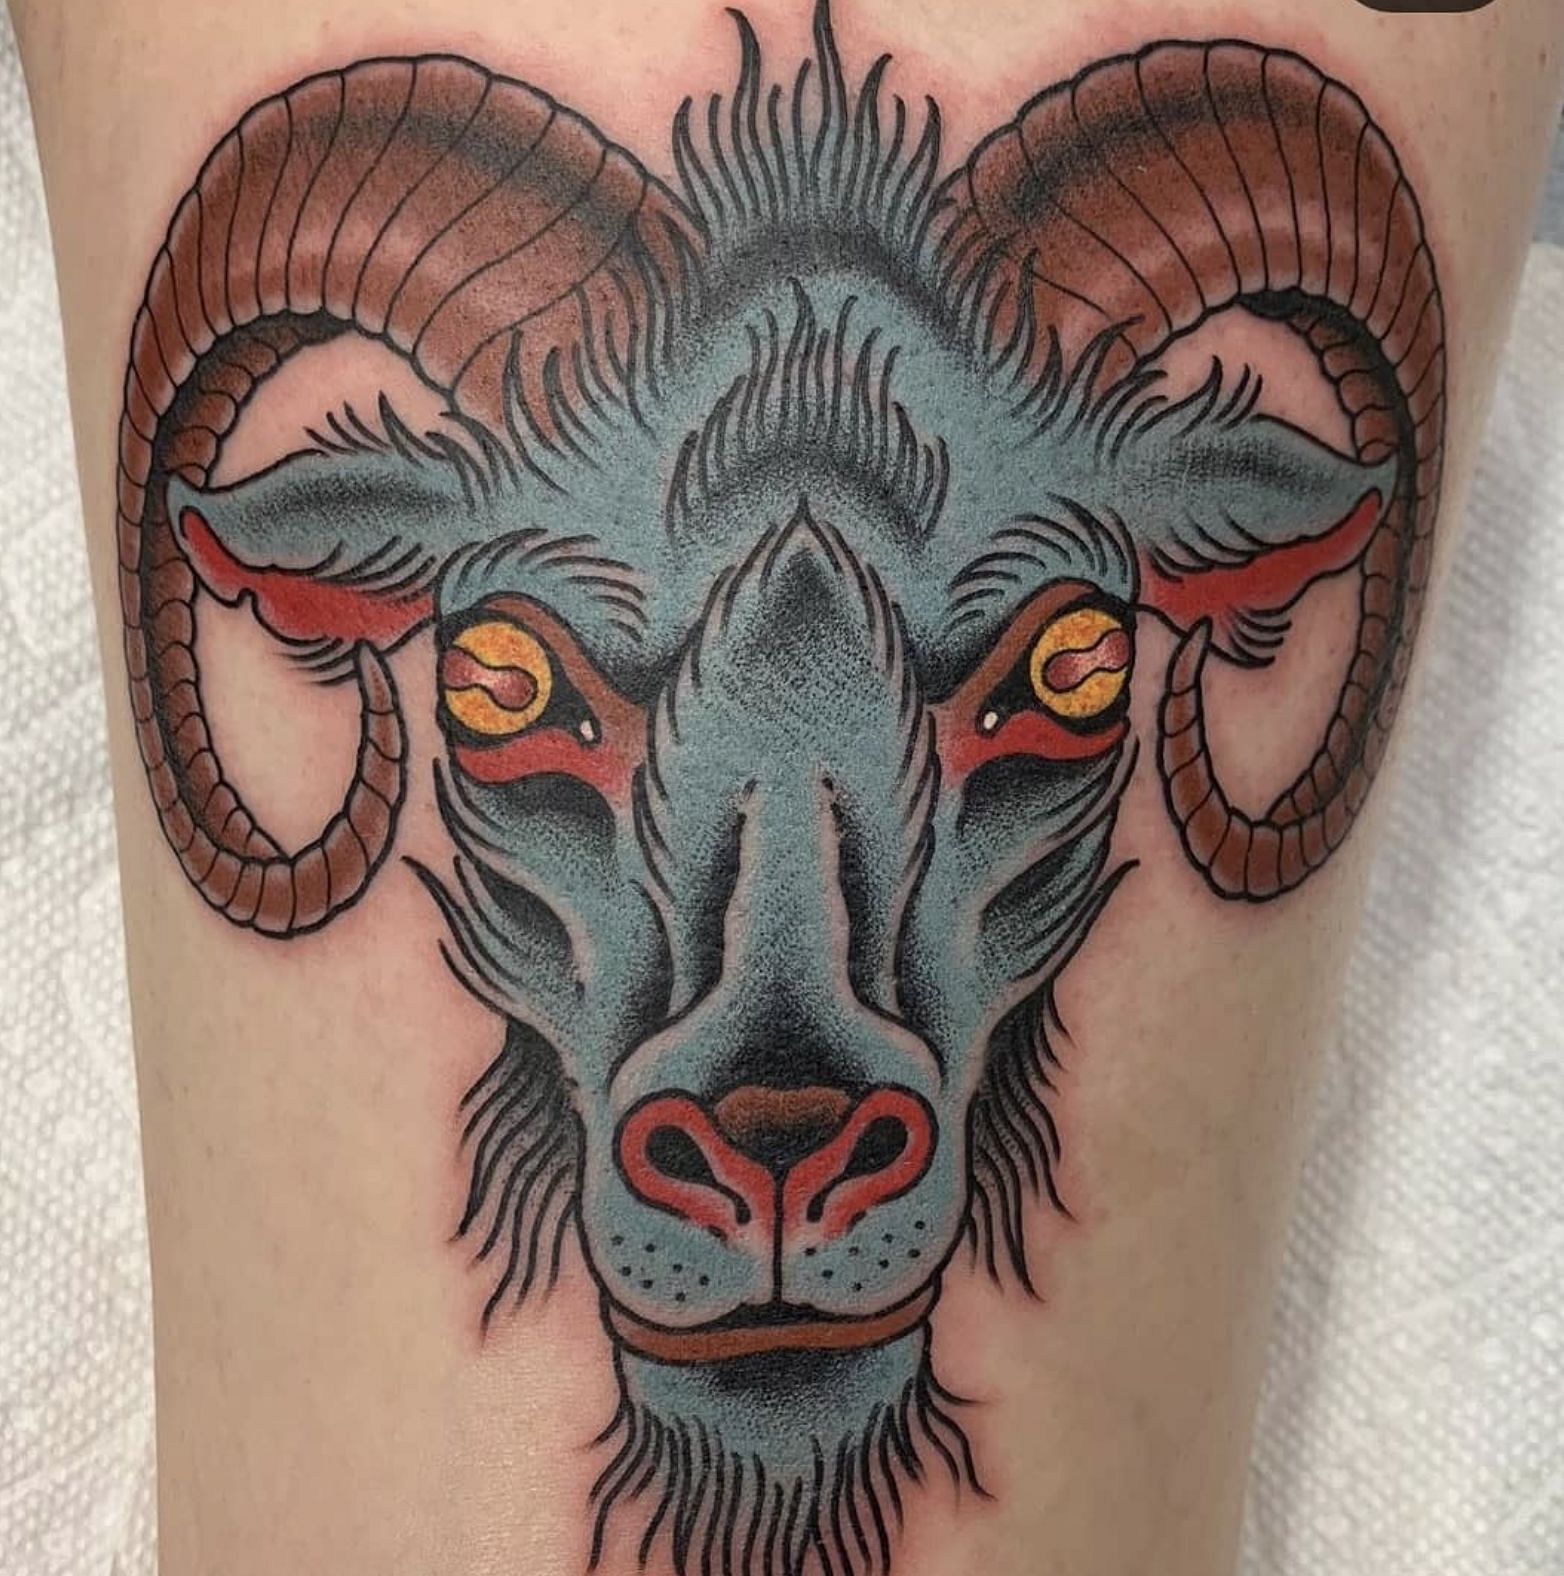 An eye-catching tattoo of a goat from a Brady fan. Source: ghostinthemachine.tattoo (IG)